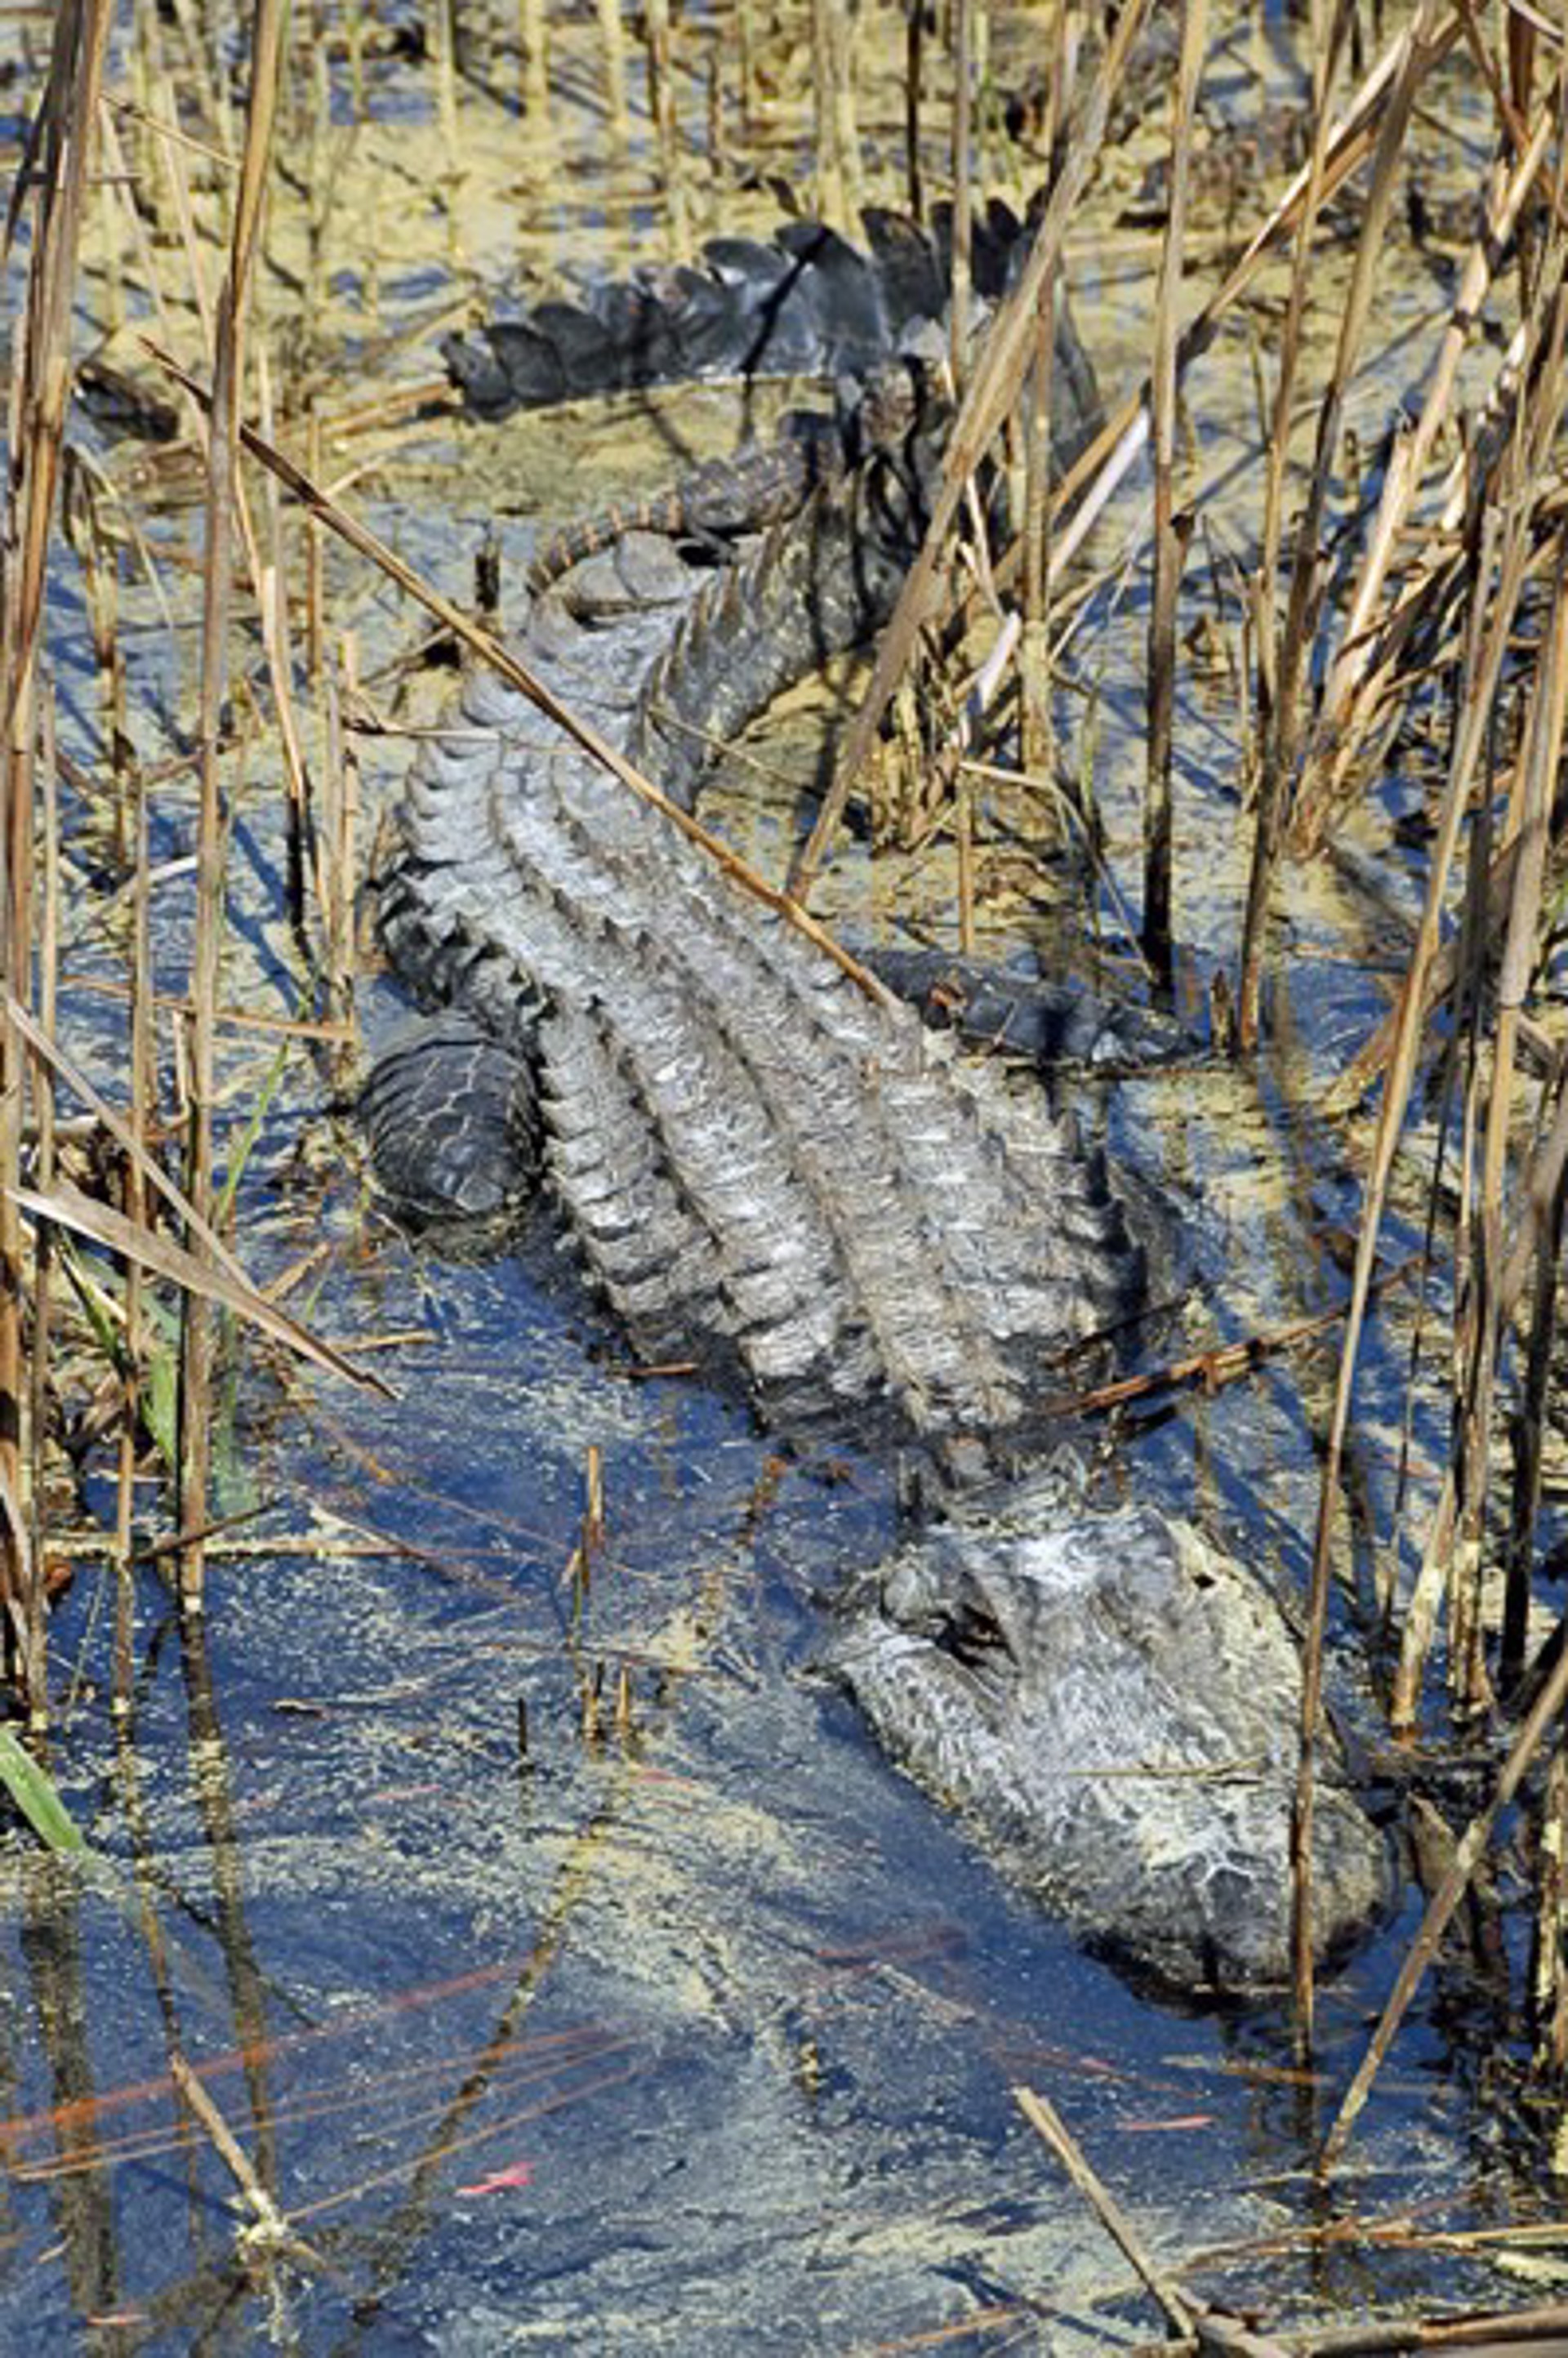 Gator in Reeds by Penny Hoey